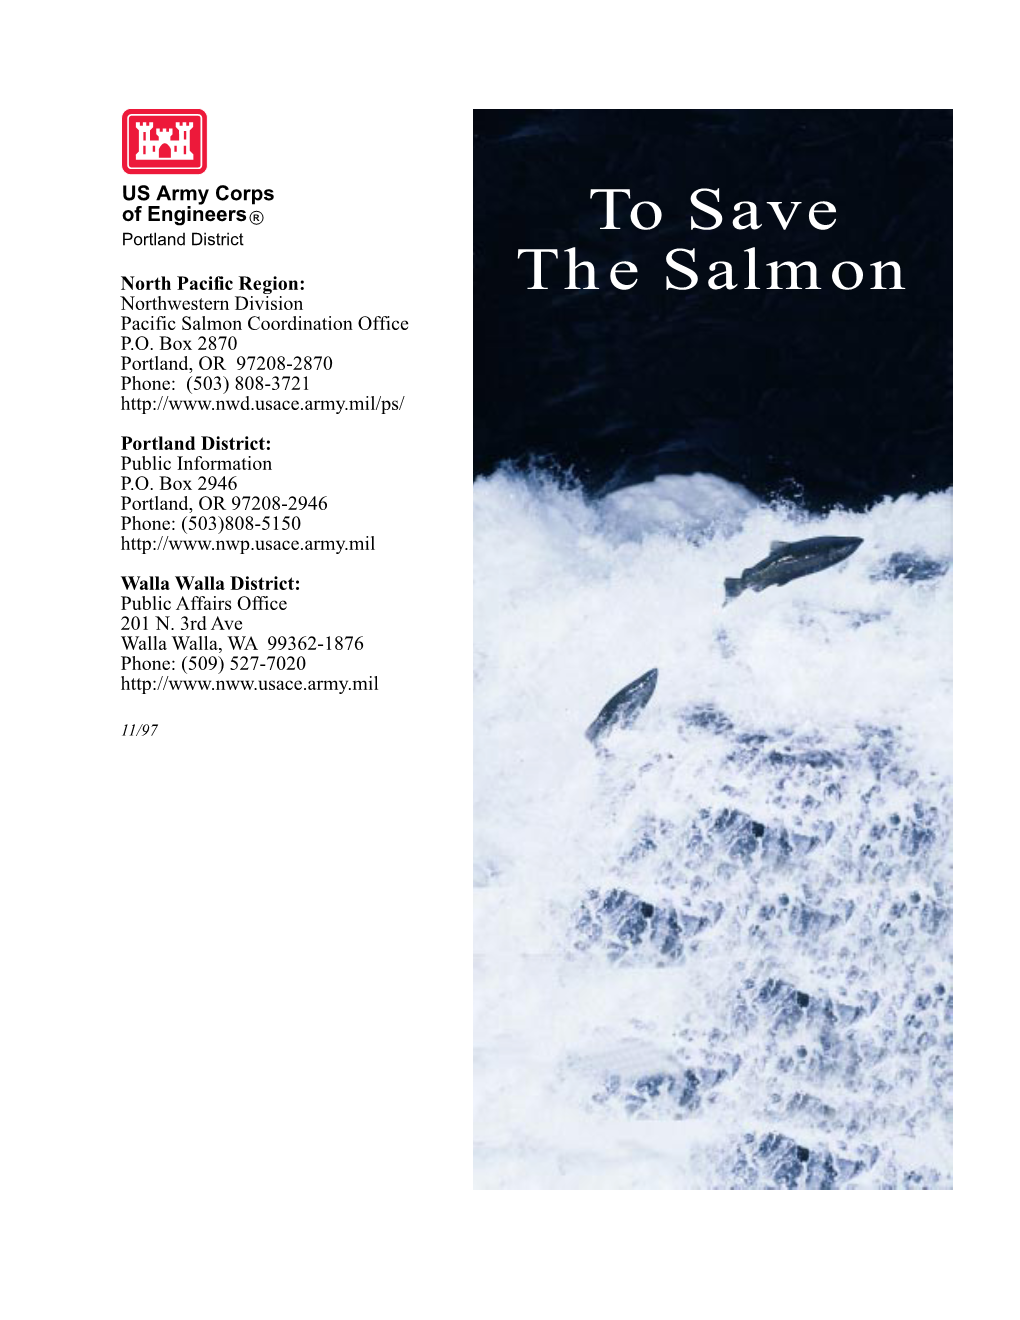 To Save the Salmon Here’S a Bit of History and Highlights of the Corps' Work to Assure Salmon Survival and Restoration